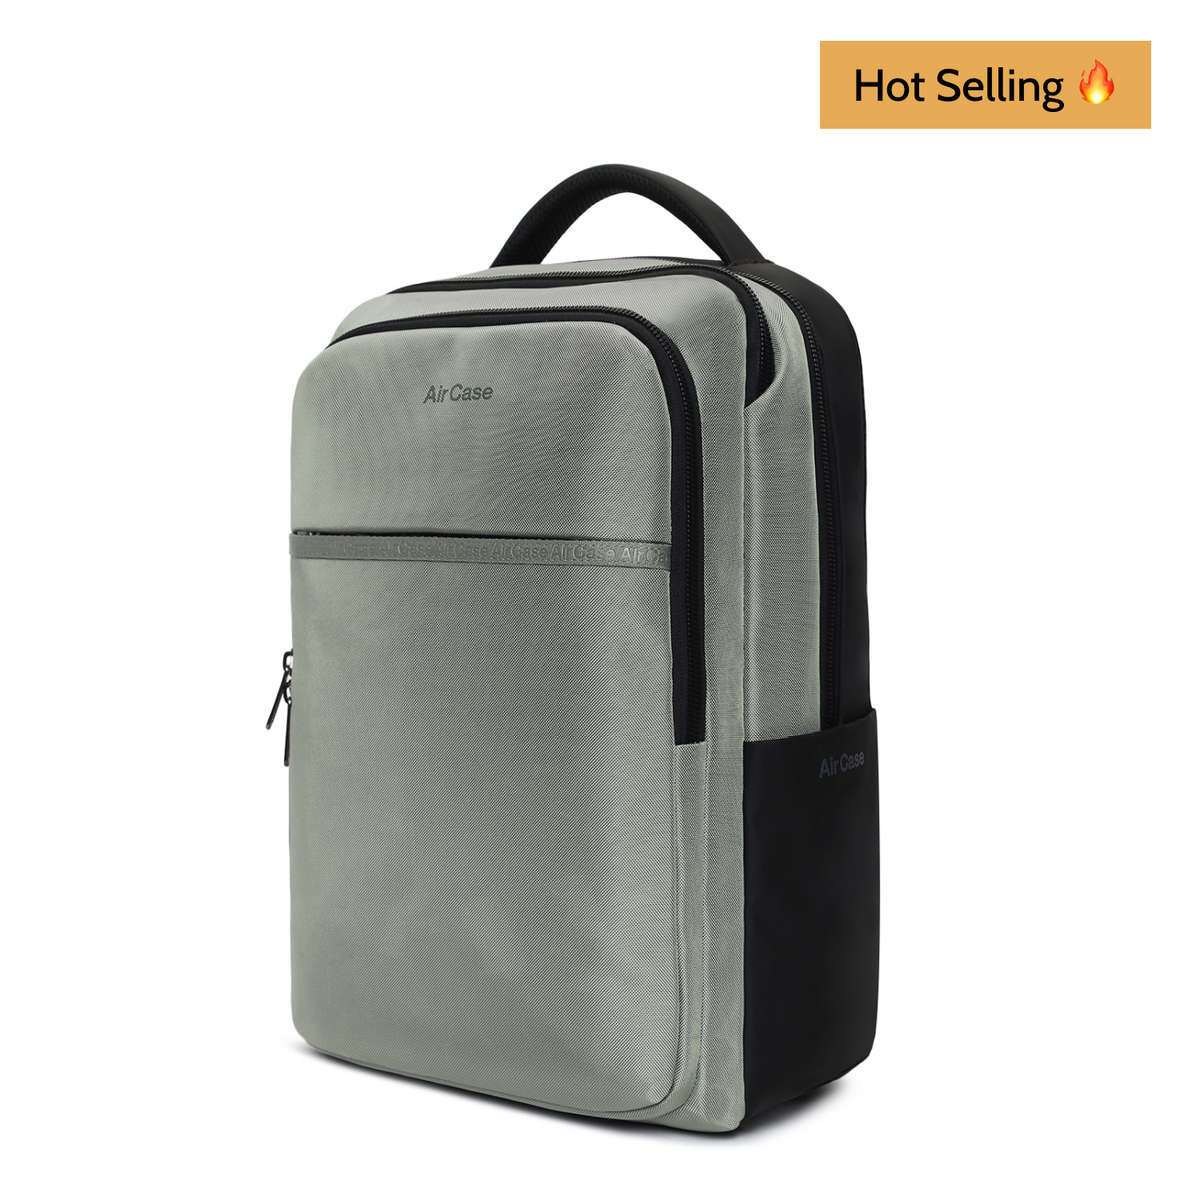 Aircase 21 Ltrs Black Laptop Bags - Buy Aircase 21 Ltrs Black Laptop Bags  Online at Low Price - Snapdeal